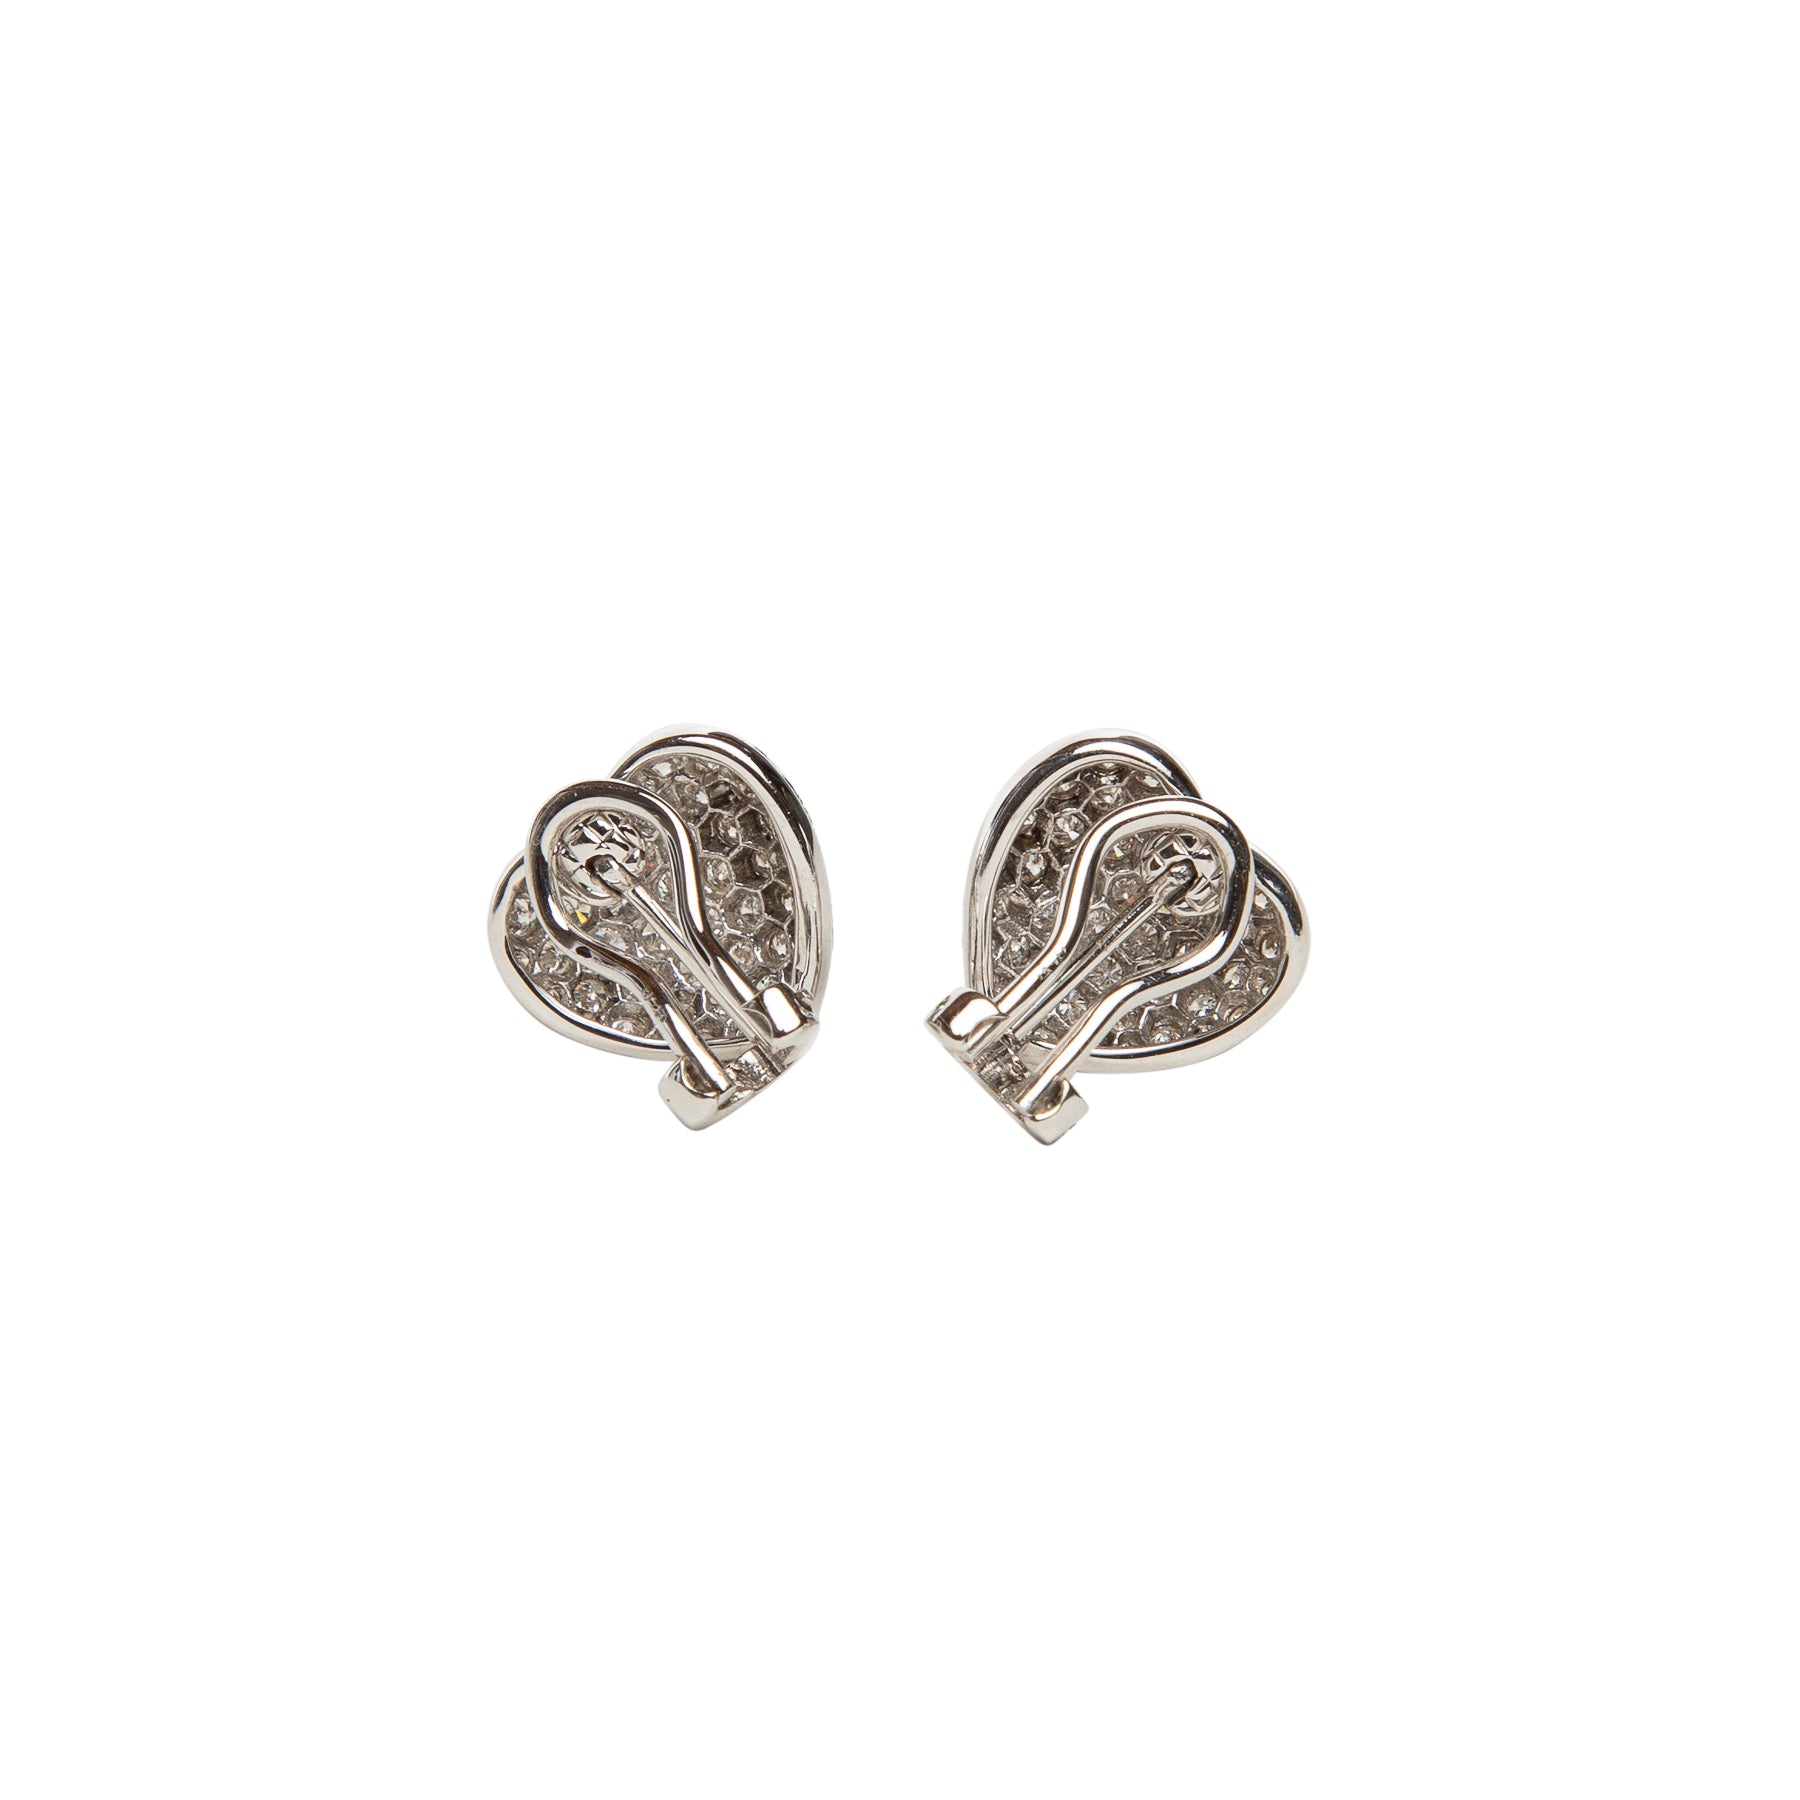 MAXFIELD PRIVATE COLLECTION | DIAMOND HEART EARRINGS